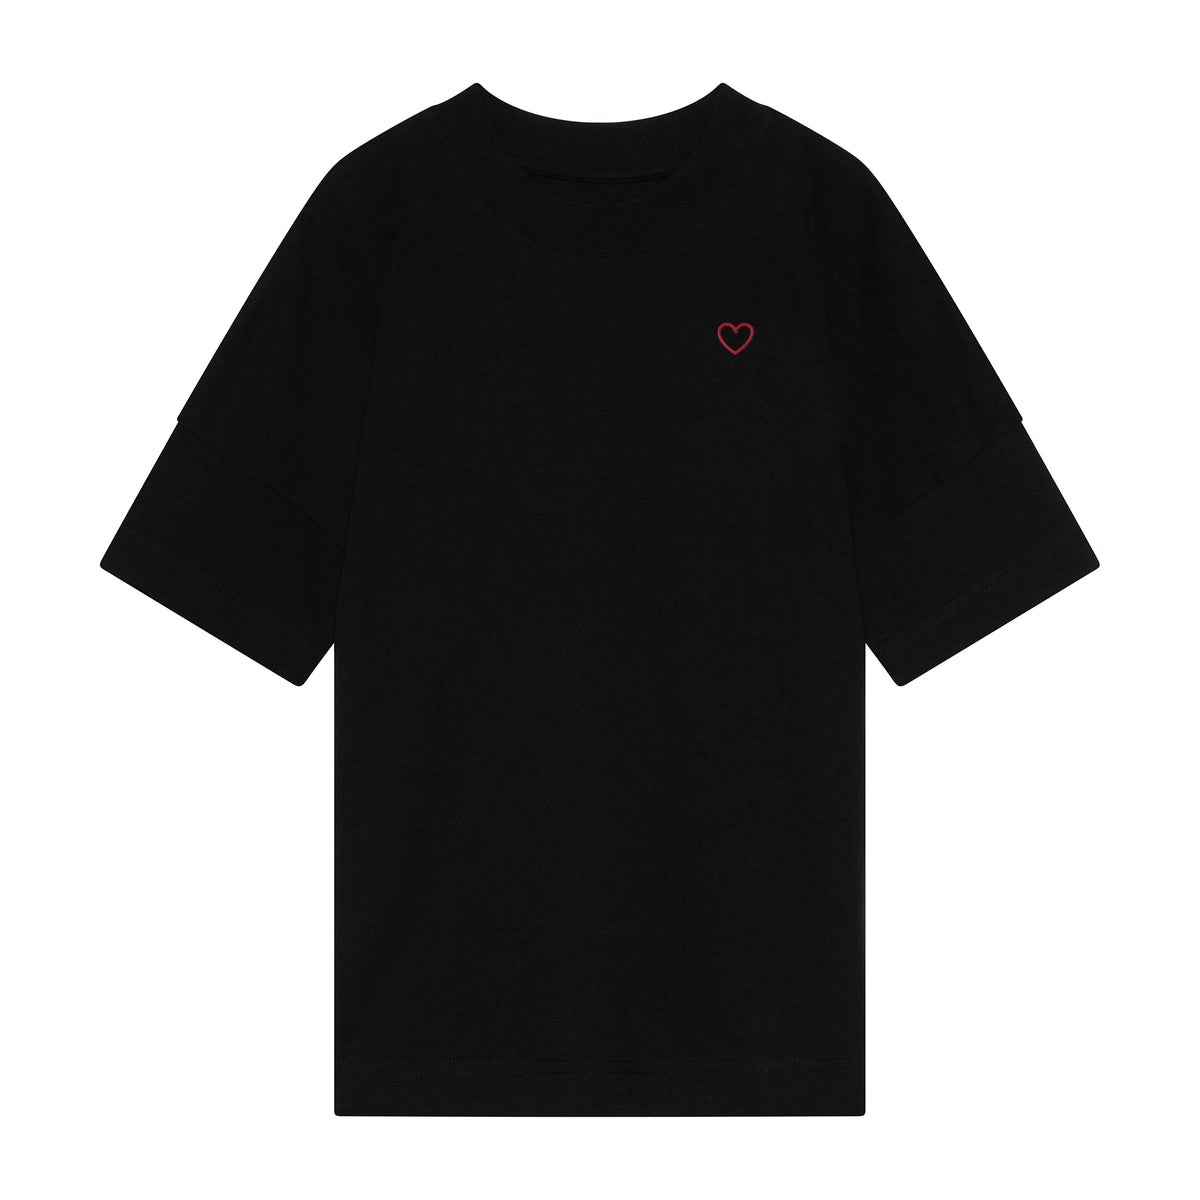 Oversized Black T-Shirt. Silhouetted Heart